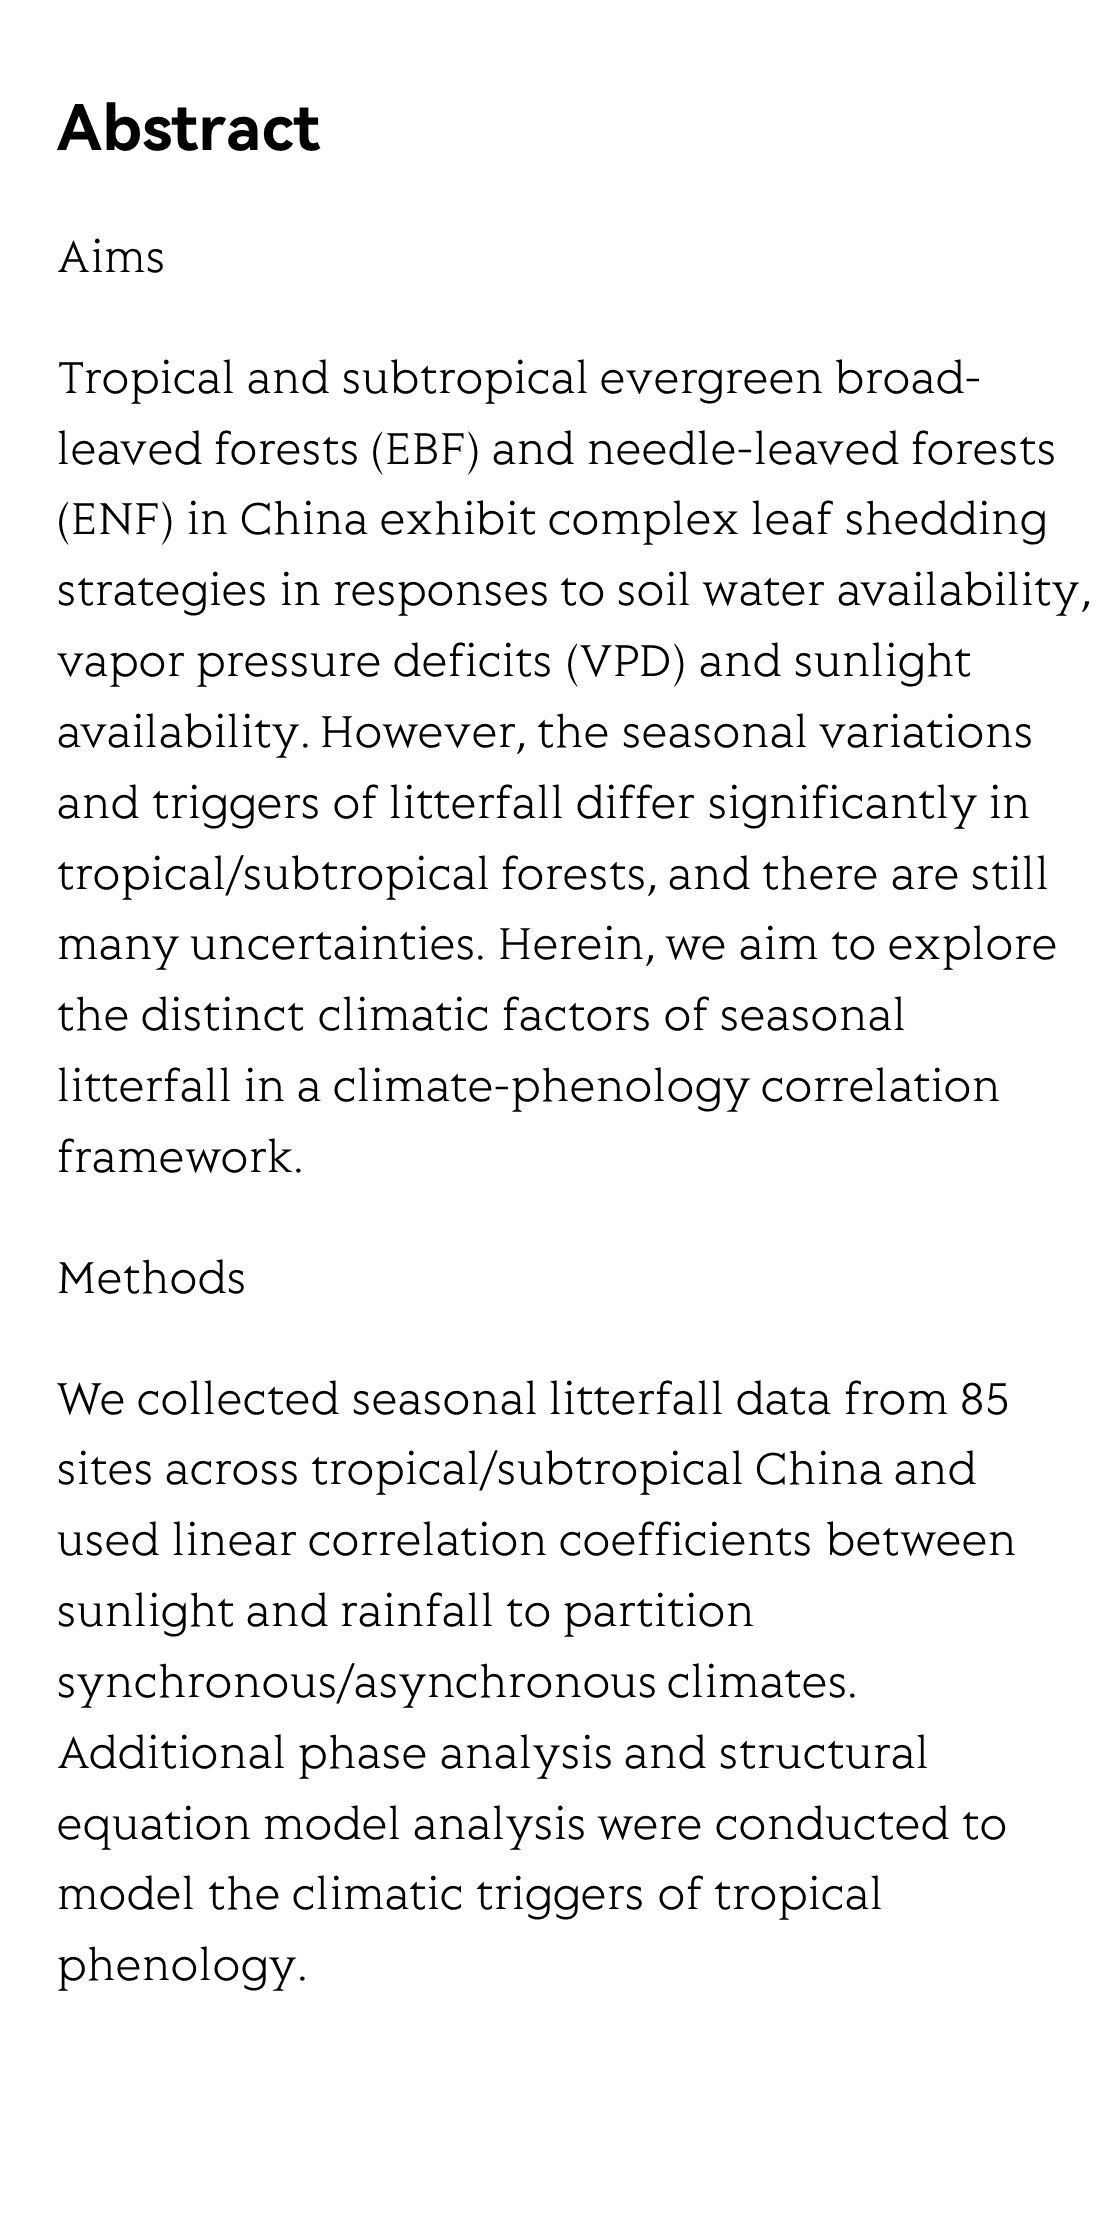 Litterfall seasonality and adaptive strategies of tropical and subtropical evergreen forests in China_2